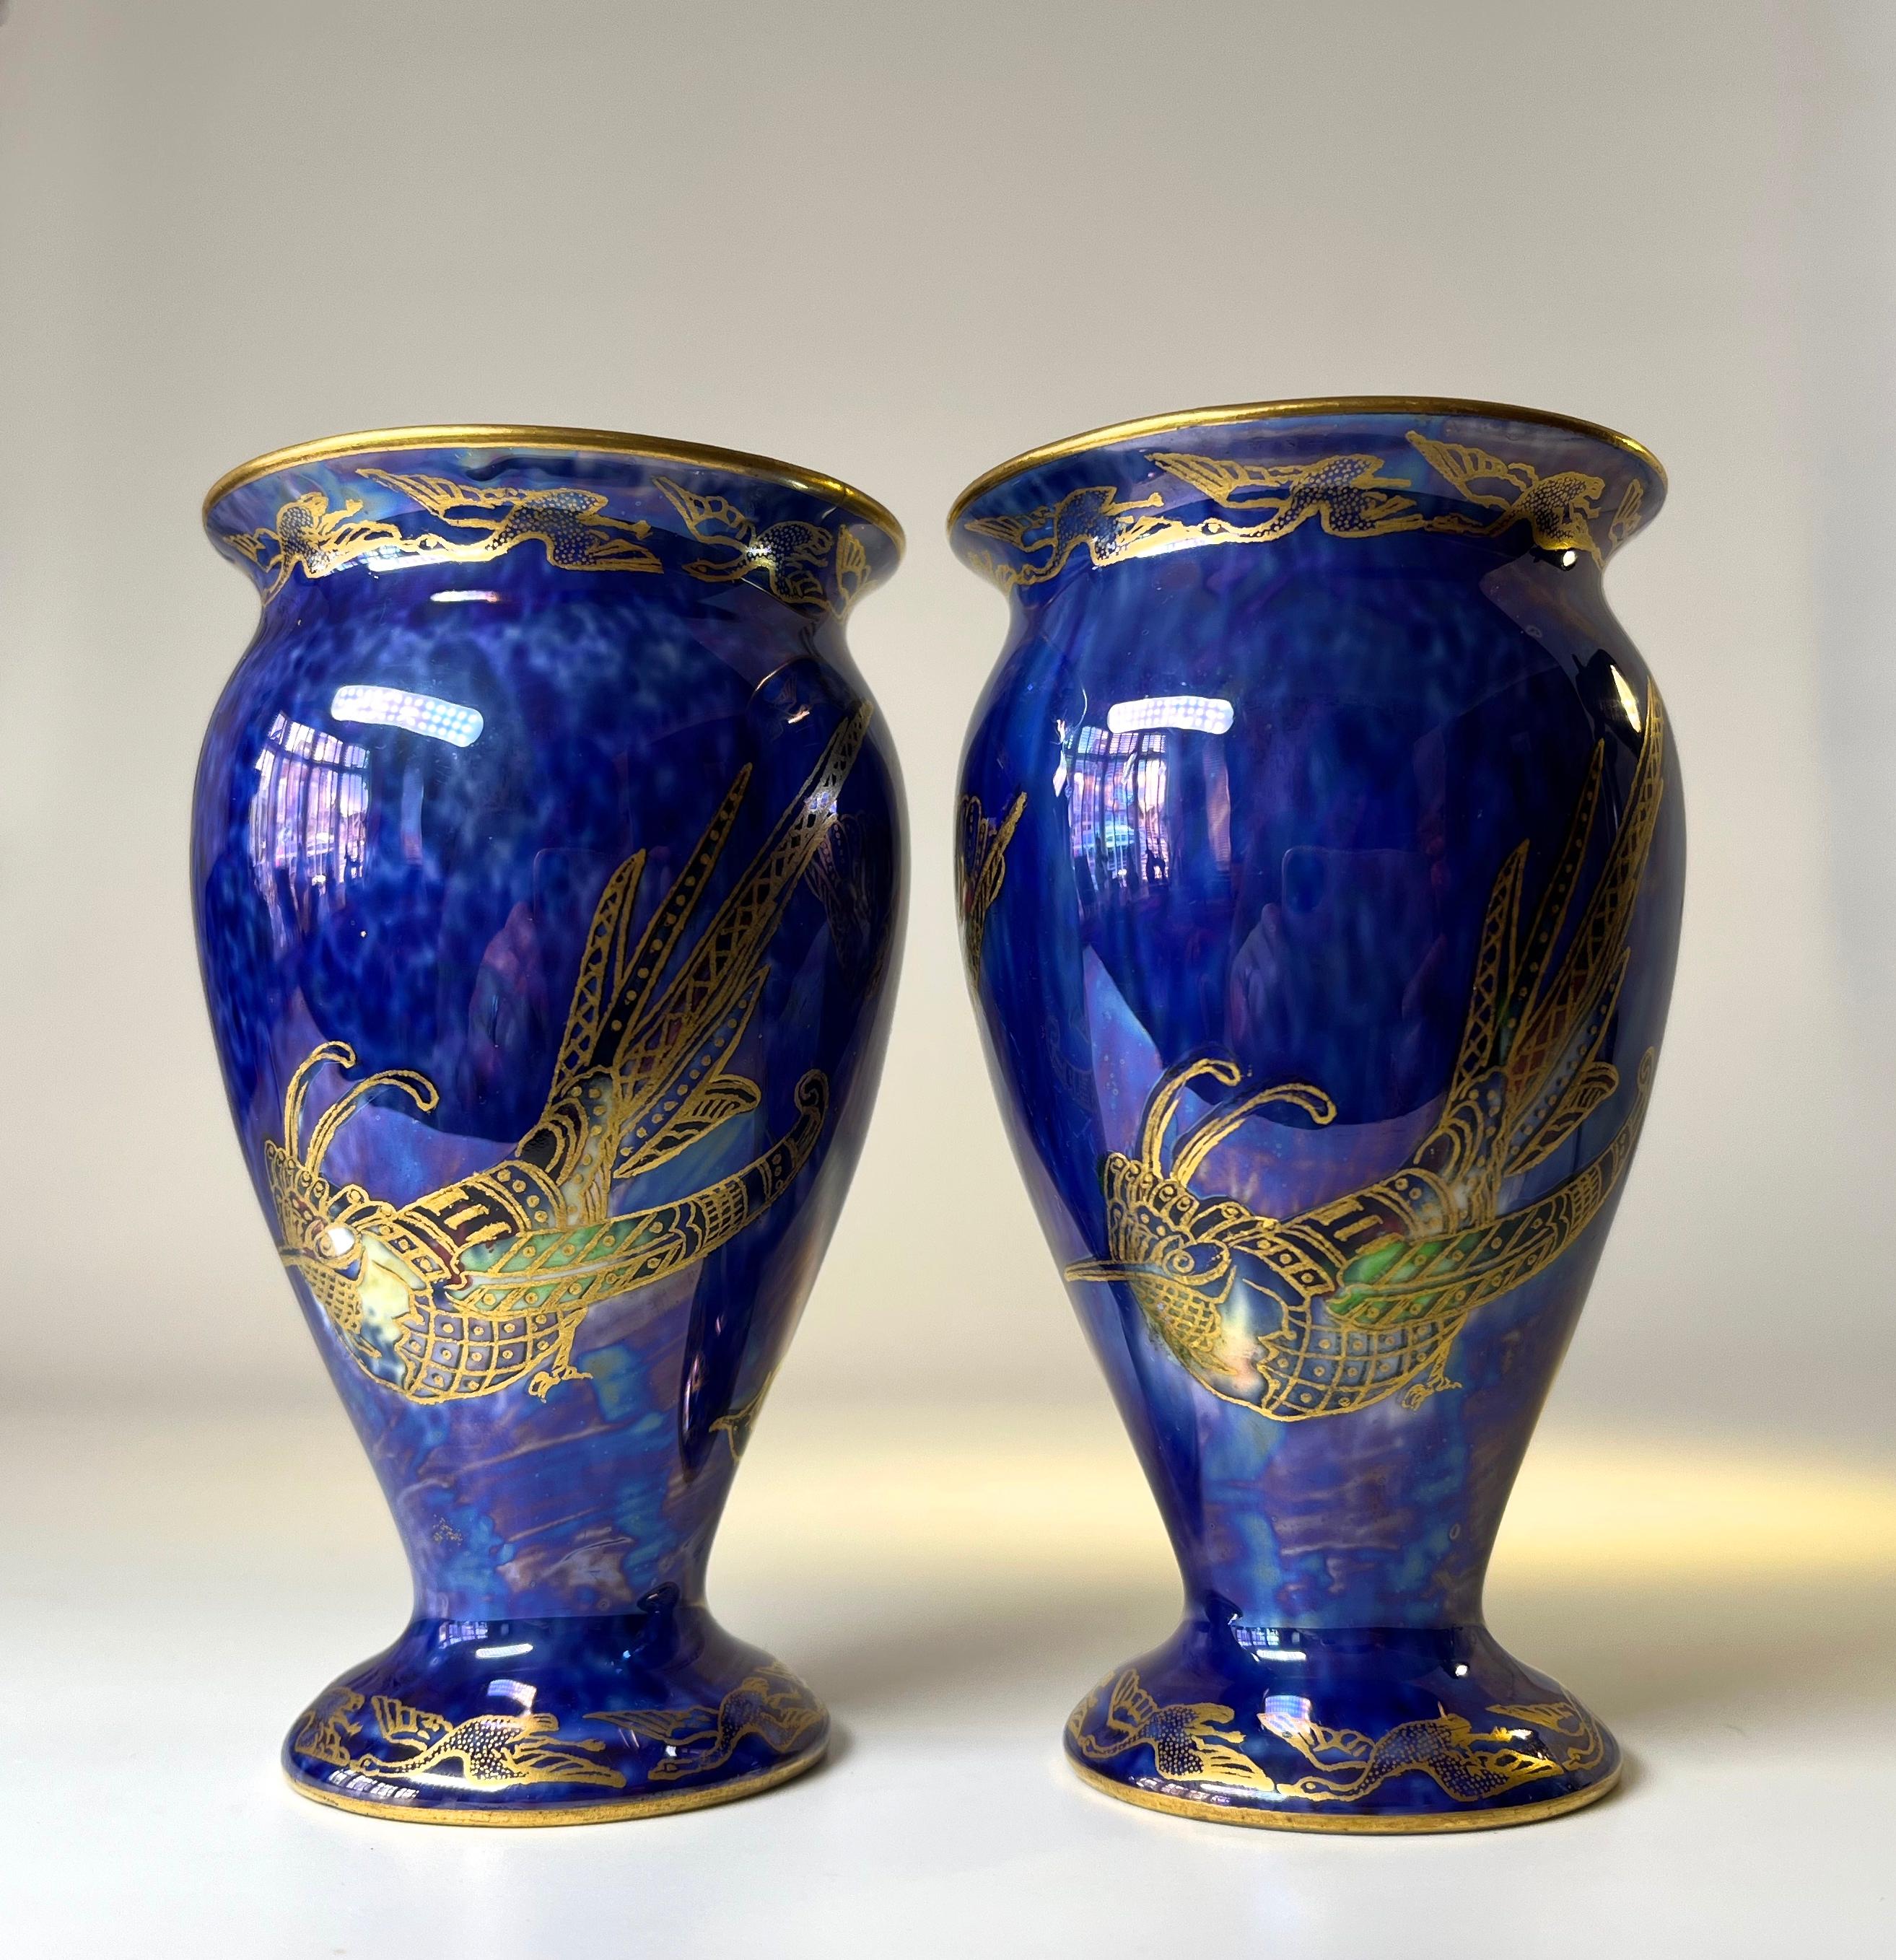 Exquisite Pair Wedgwood Royal Blue Bird of Paradise Ordinary Lustre Vases Z5294 In Excellent Condition For Sale In Rothley, Leicestershire